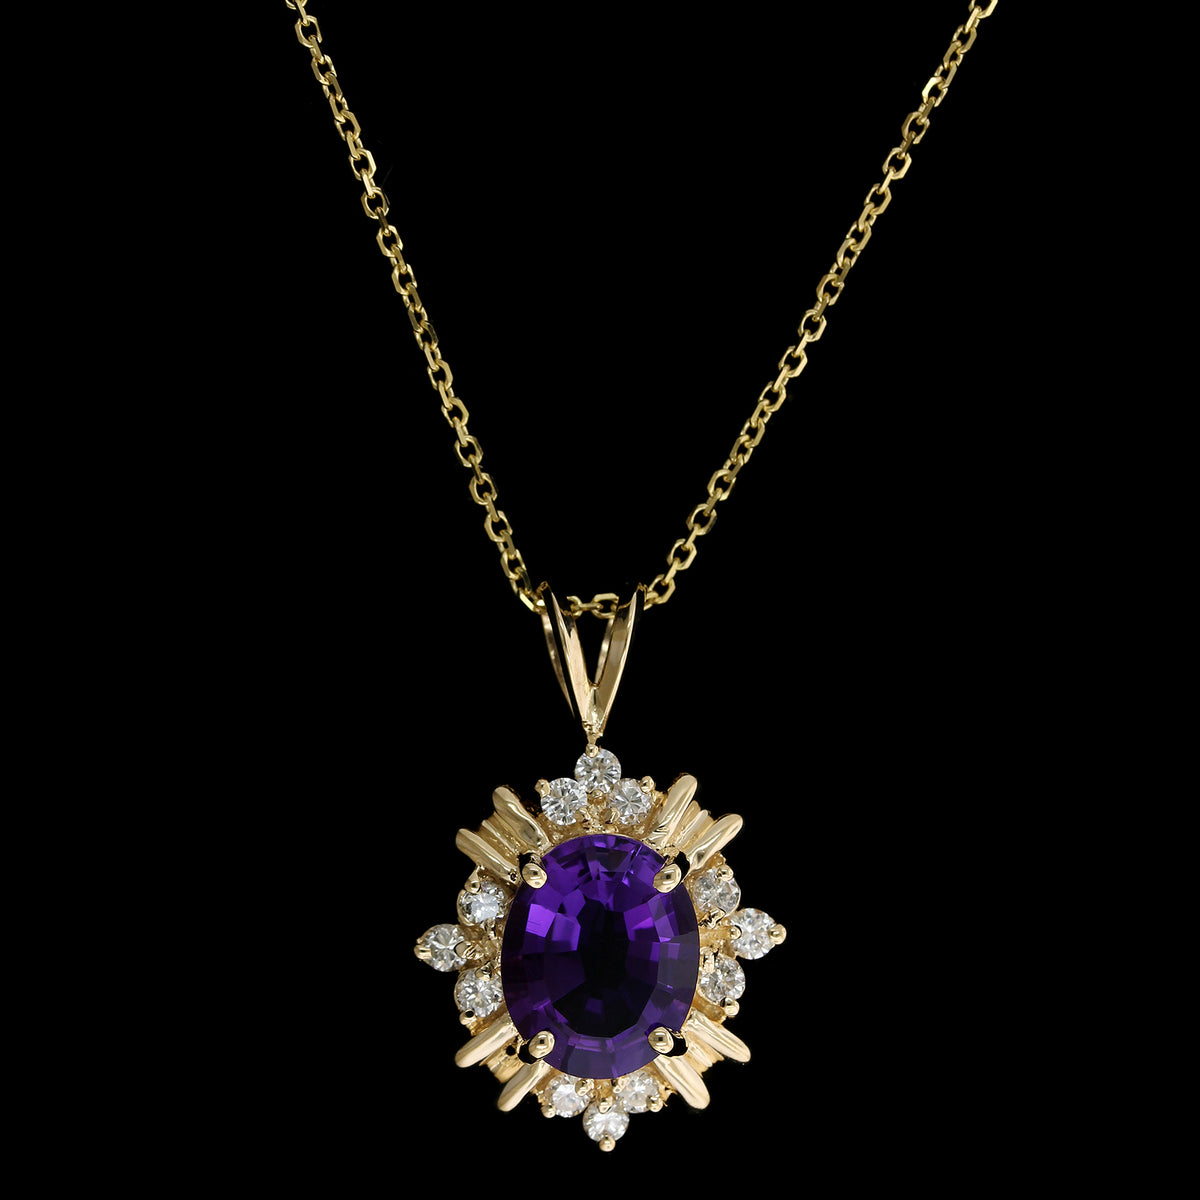 14K Yellow Gold Estate Amethyst and Diamond Pendant Necklace